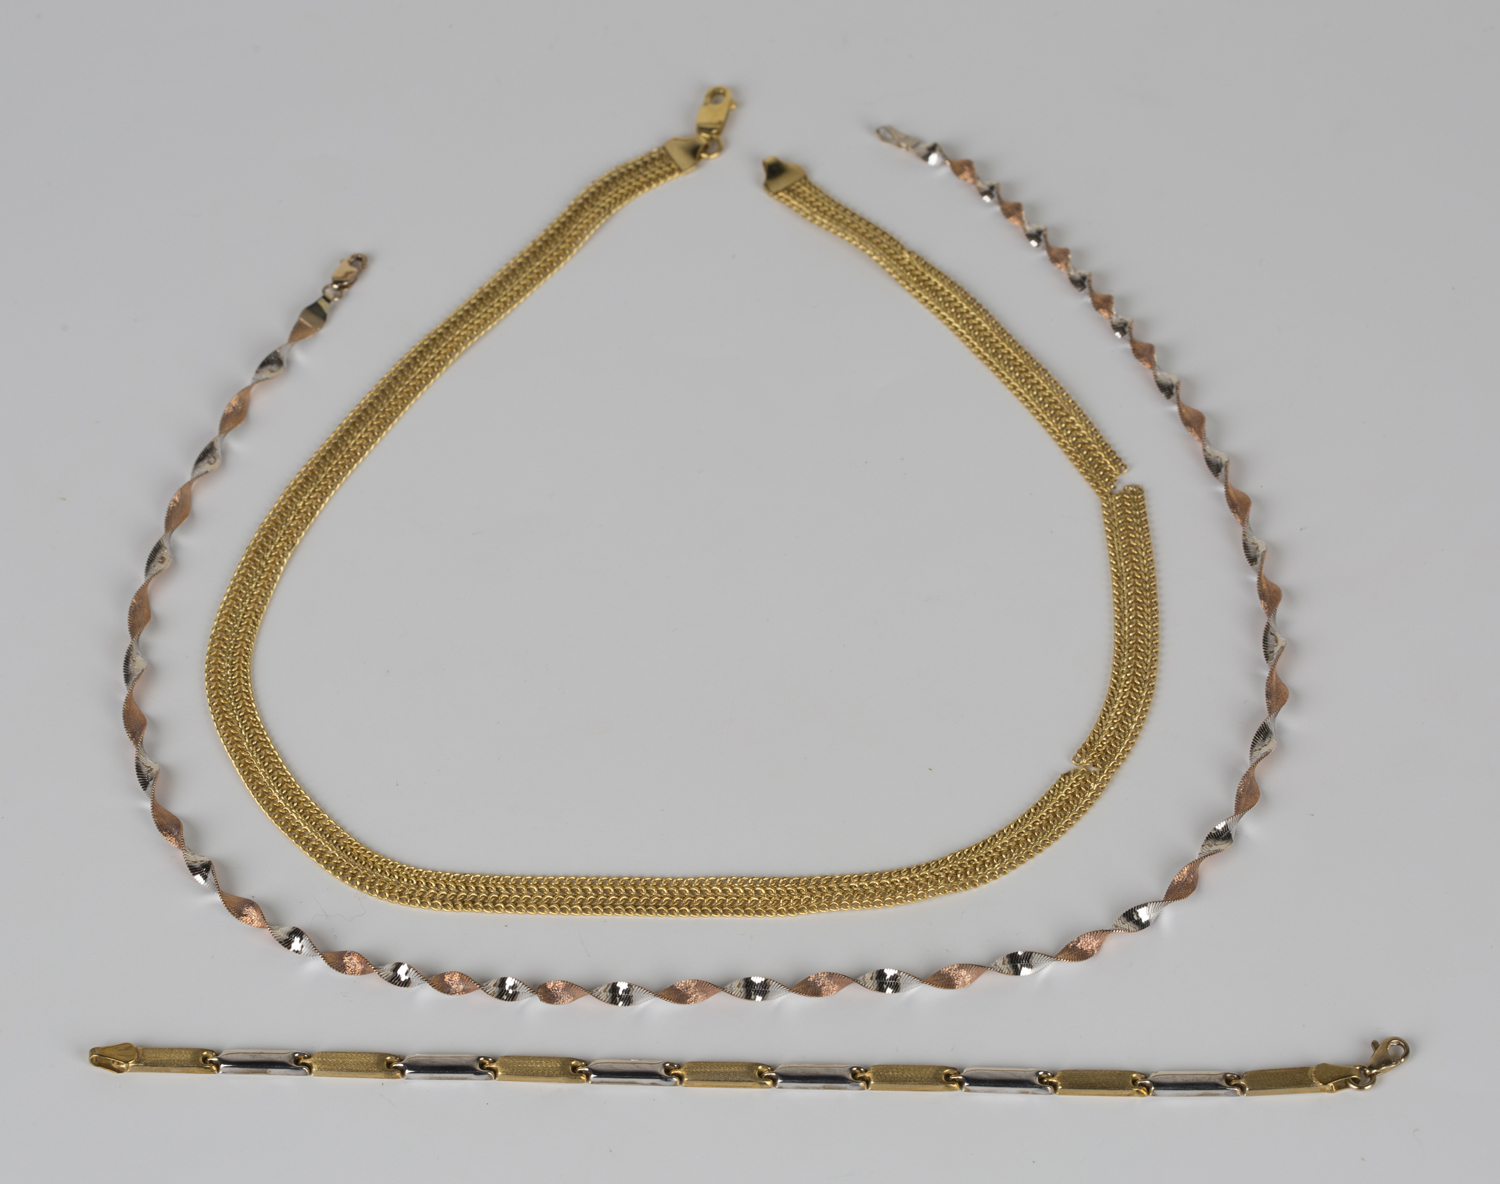 A 9ct gold necklace in a wide interwoven link design, on a sprung hook shaped clasp, length 45cm (